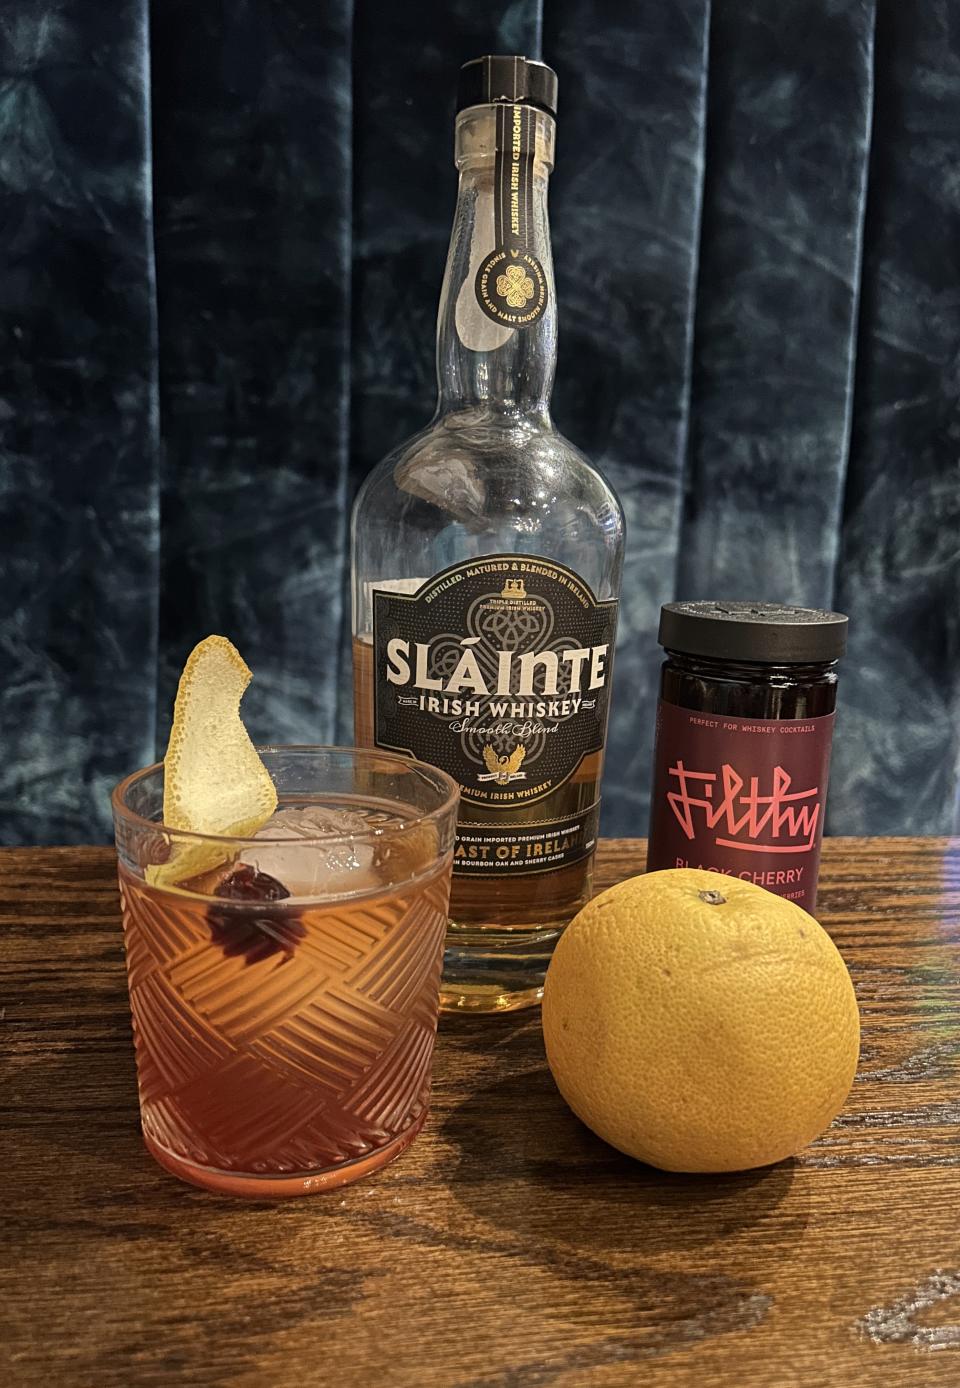 Local bartenders will create cocktails on Jan. 3 using Slainte Irish Whiskey during the Slainte Traditions & Cheers Cocktail Competition at 28 North Gastropub in Viera.